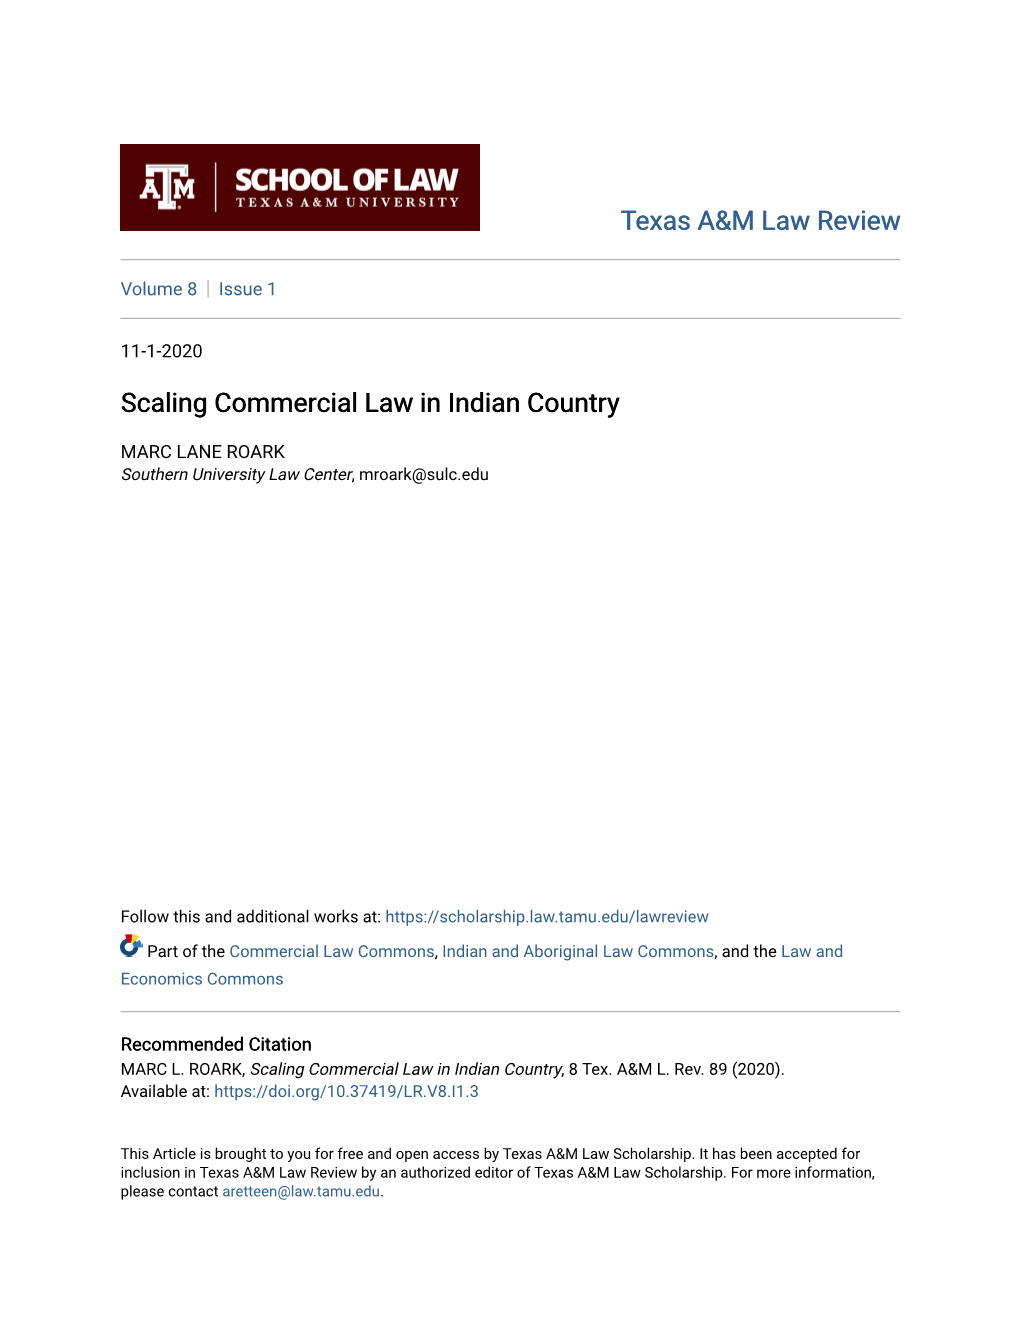 Scaling Commercial Law in Indian Country